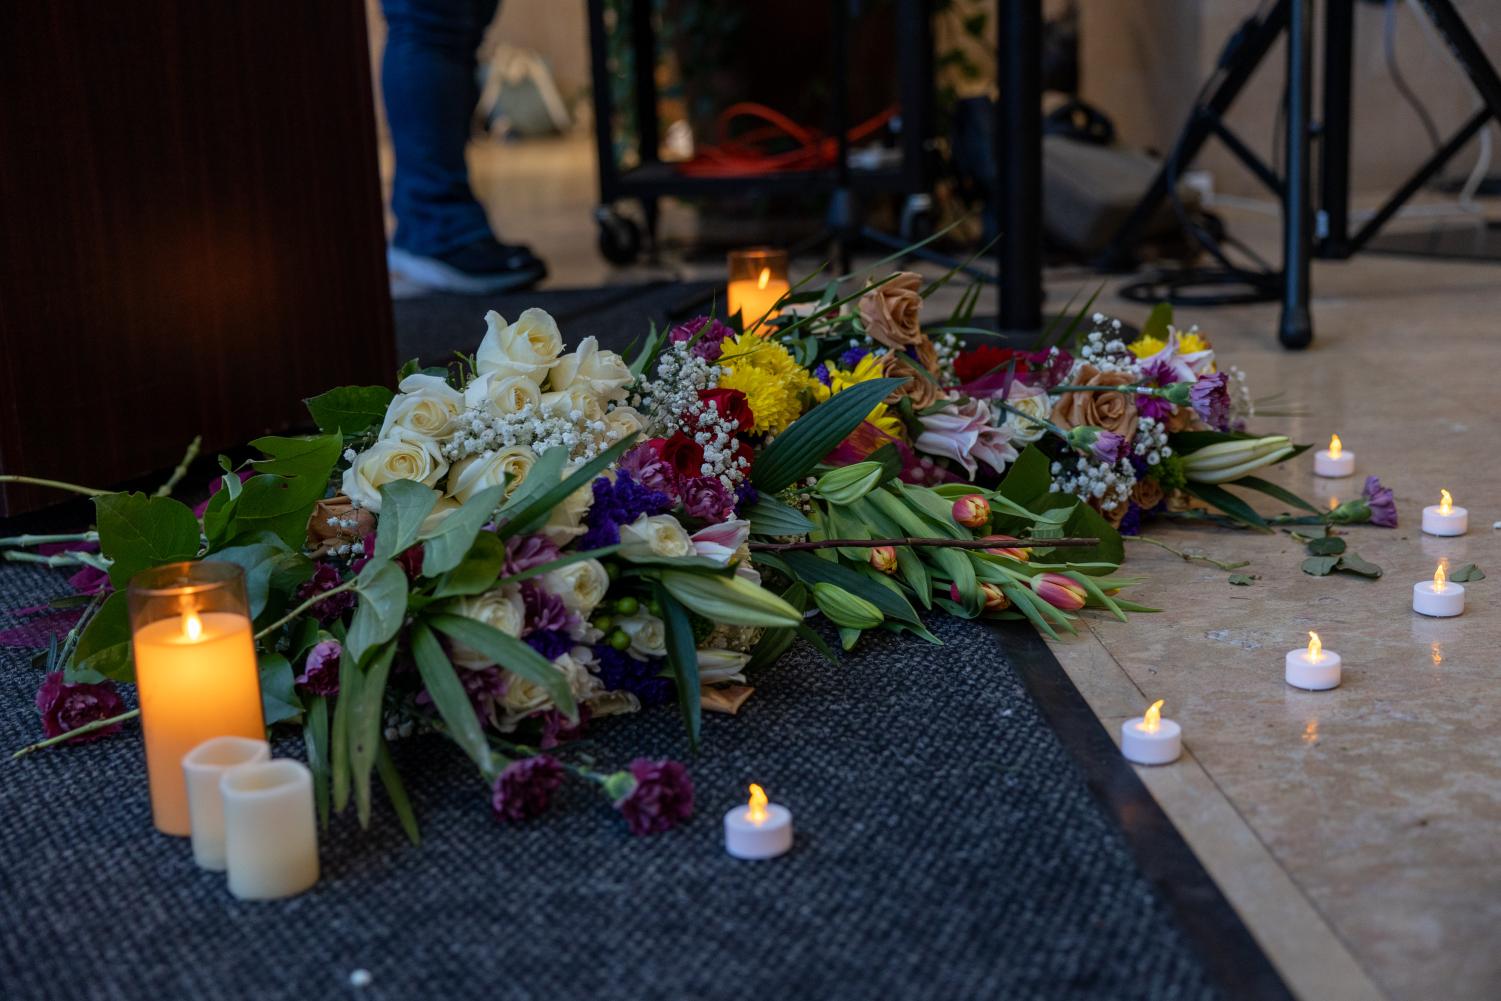 Various bouquets of flowers placed on a marble floor and on top of a grey carpet, in front of a podium. Around the flowers are battery-powered candles and two tall lit candles.